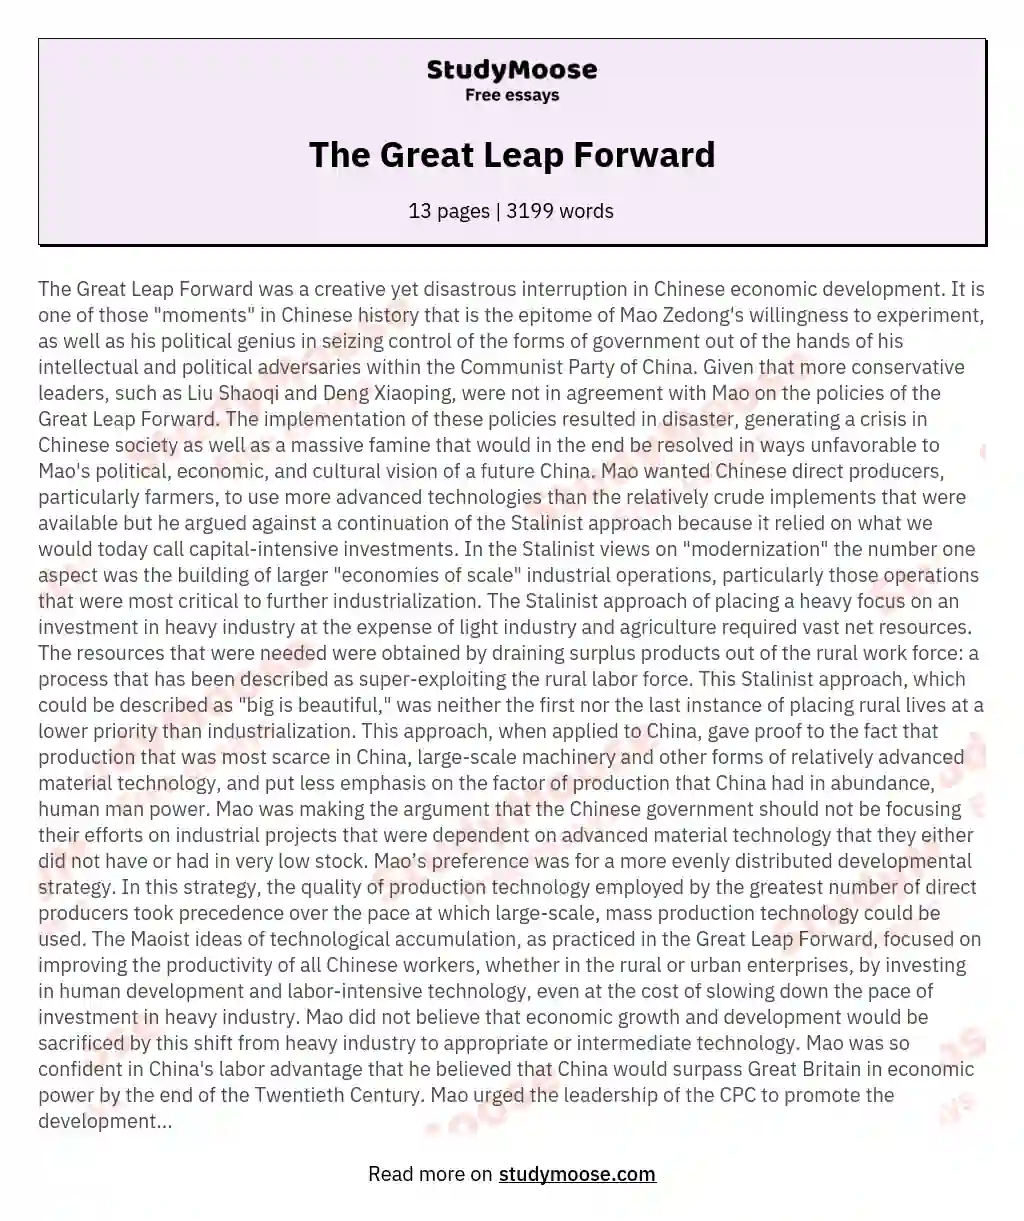 The Great Leap Forward essay